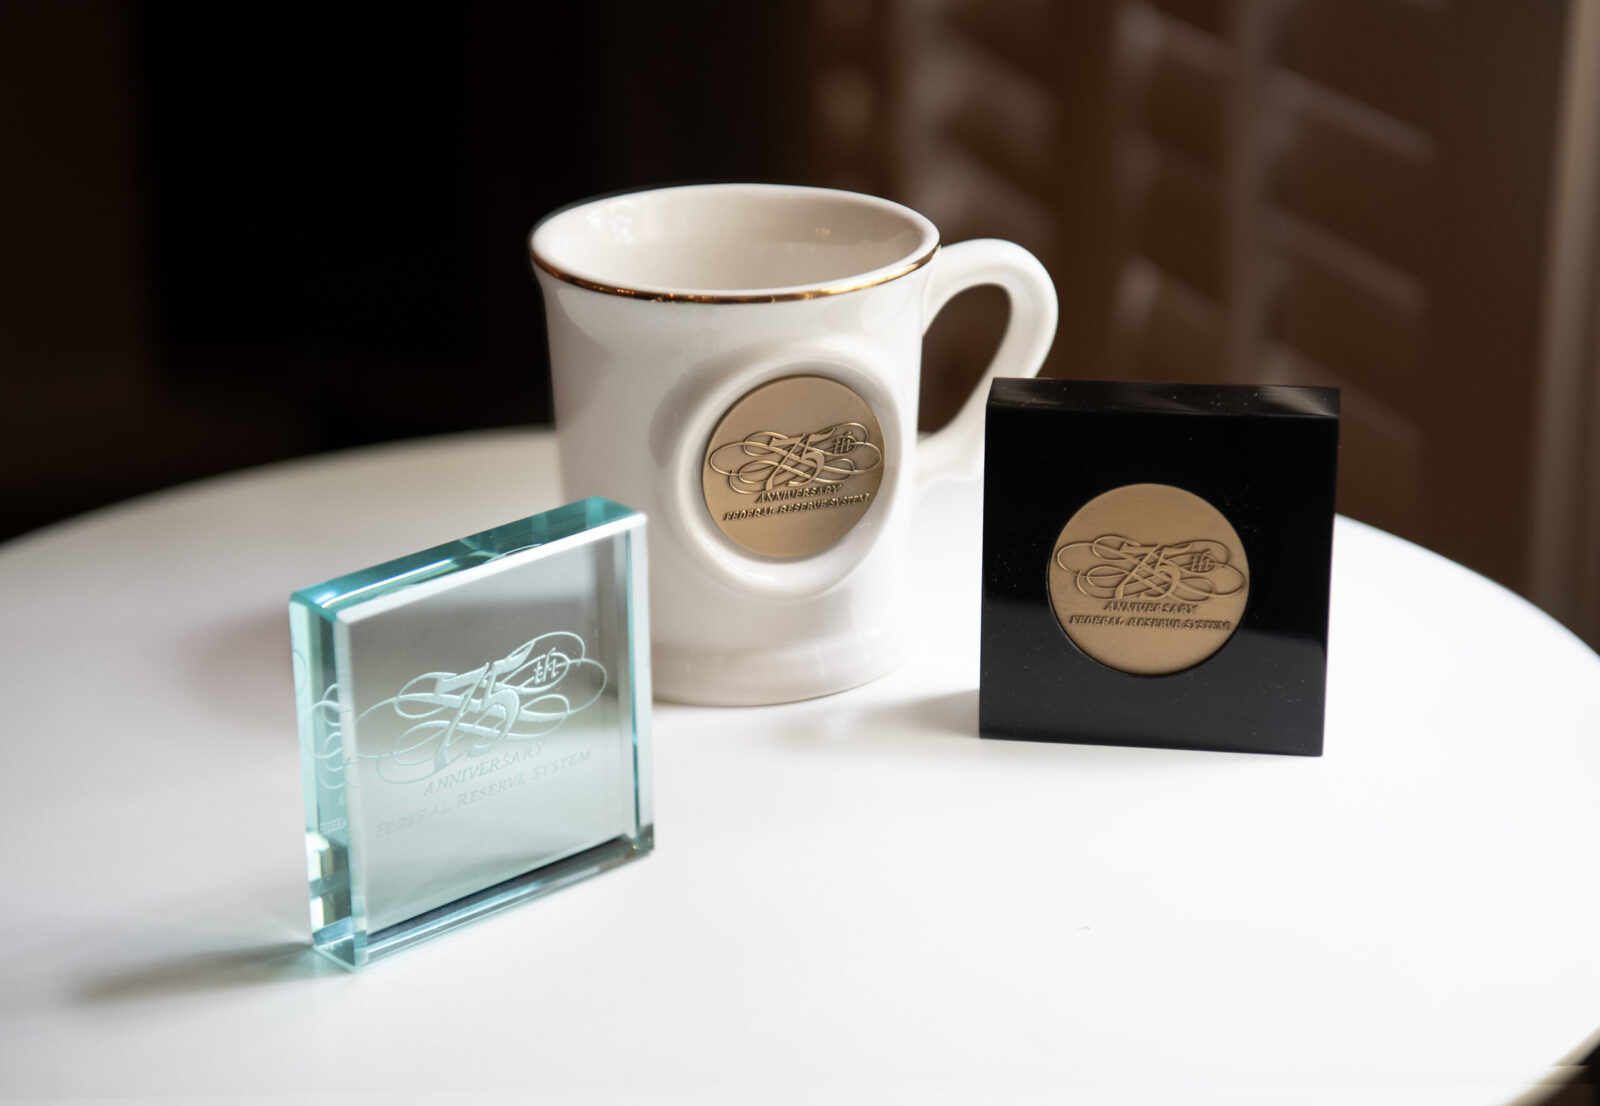 Left to Right: Square glass paperweight, coffee mug, and black stand-up desk decor with the anniversary logotype designed by Barry Huber to celebrate the 75th anniversary of the Federal Reserve System